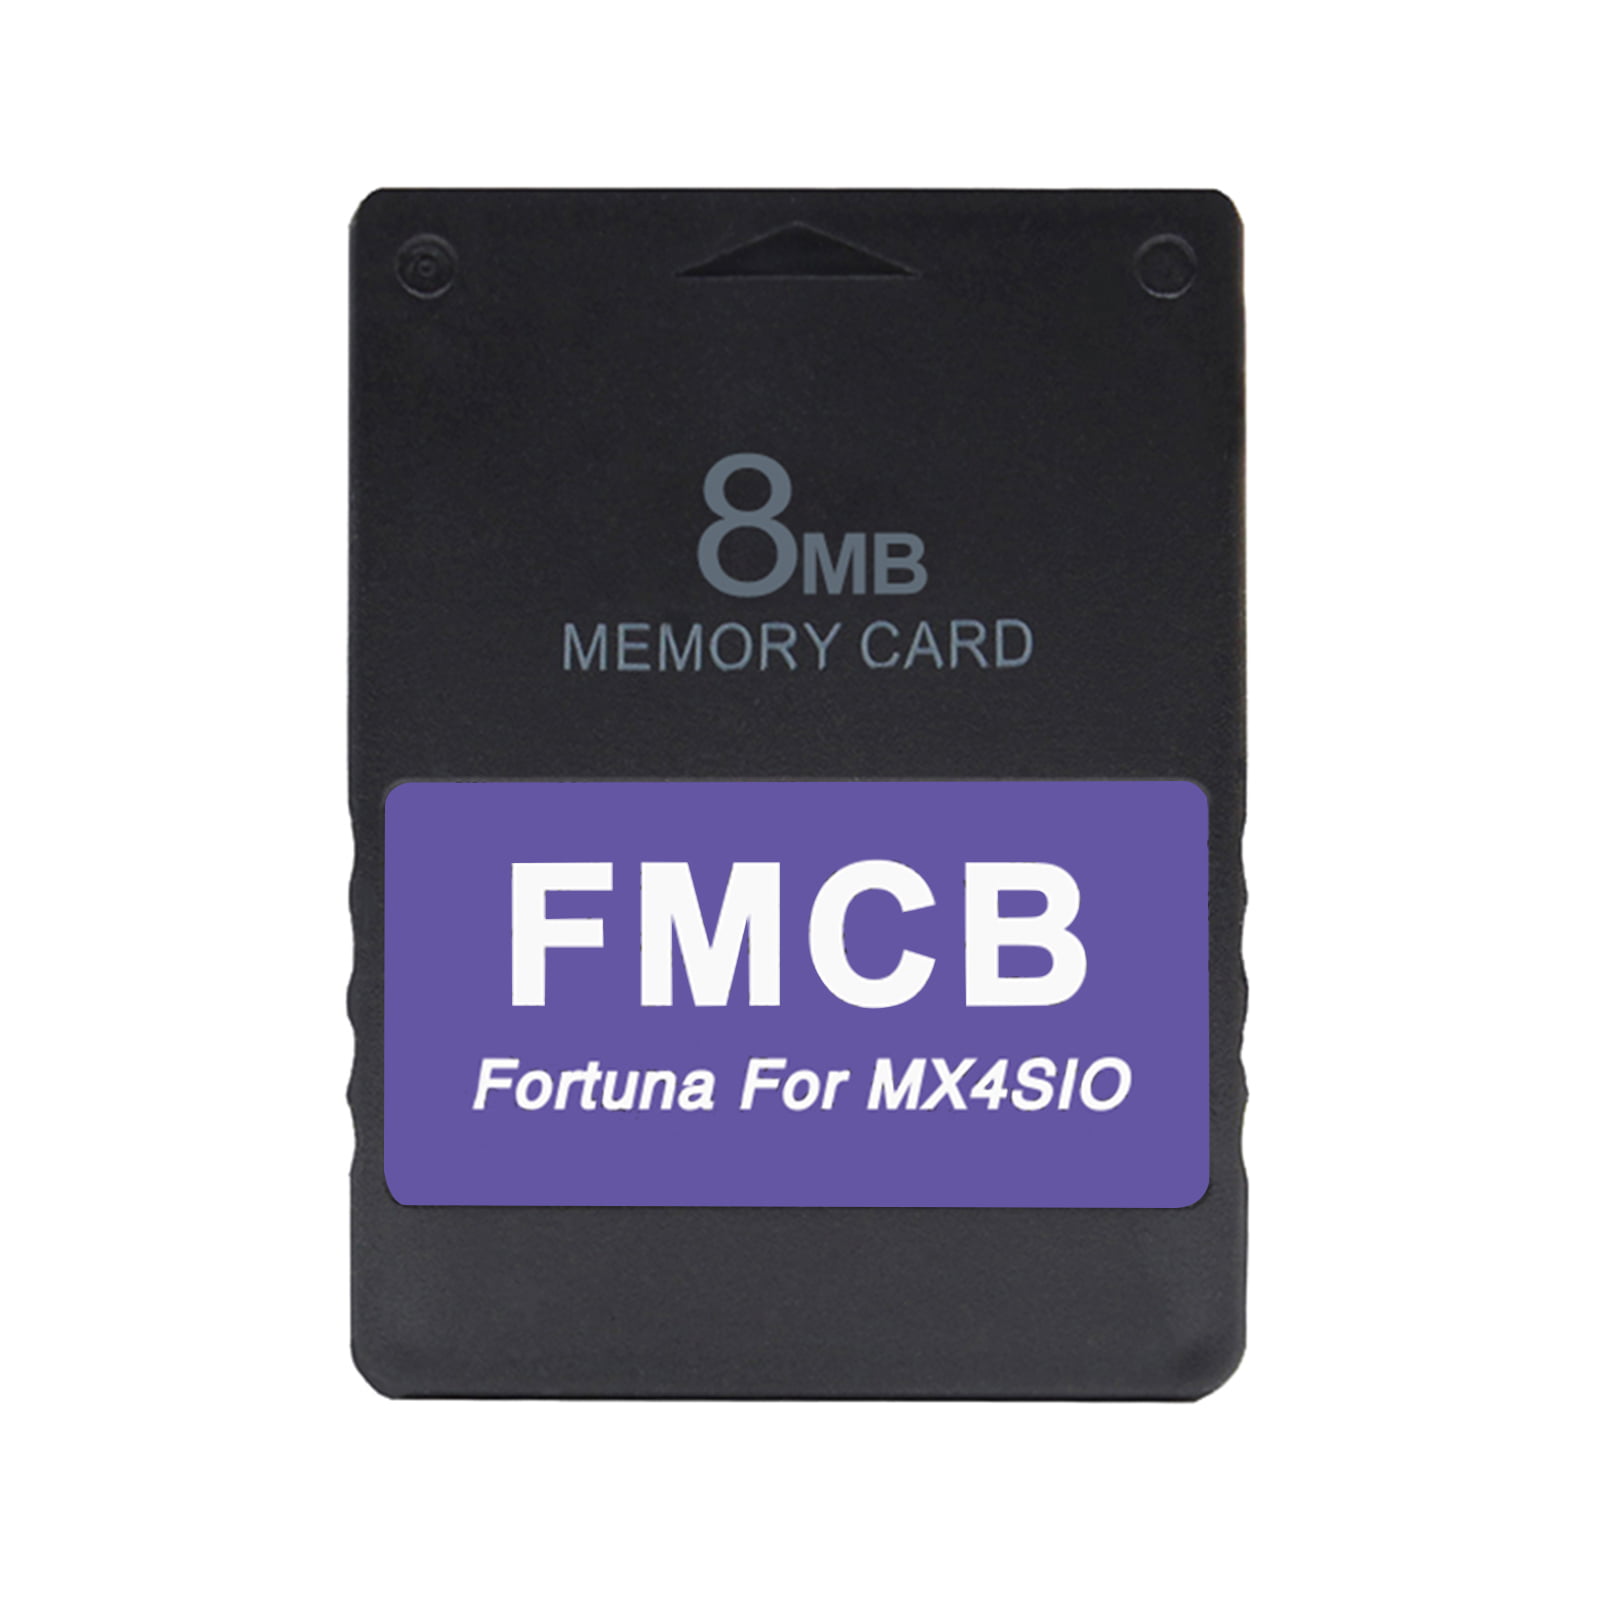 New PS2 Free McBoot Card FMCB v1.966 8M 16M 32M 64MB Memory Card Supports  All Consoles Fat and Slim Update OPL1.2.0 For MX4SIO - AliExpress